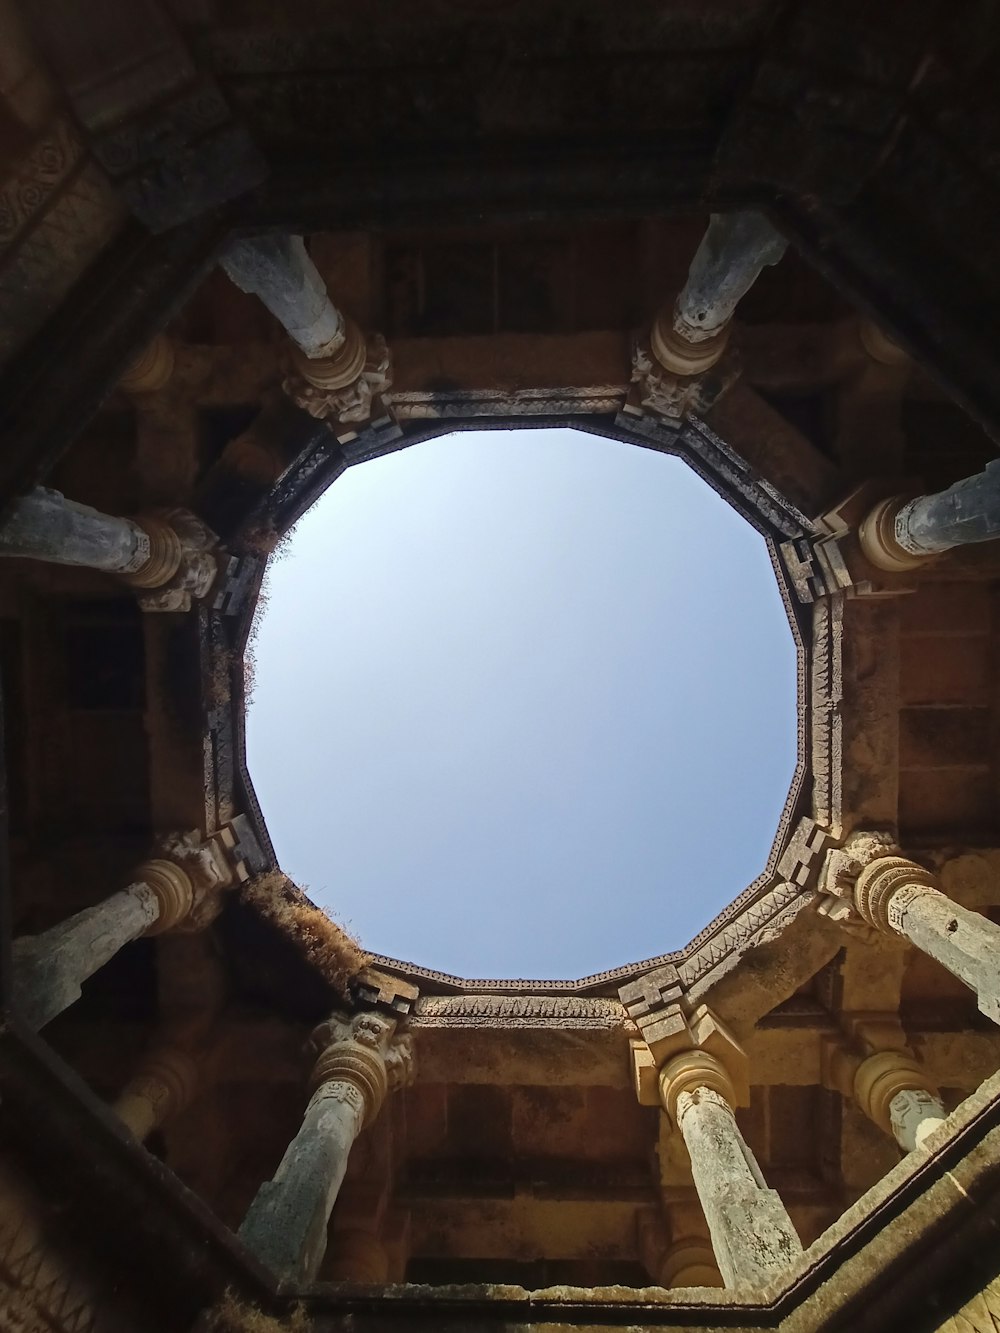 a view of the sky through a round window